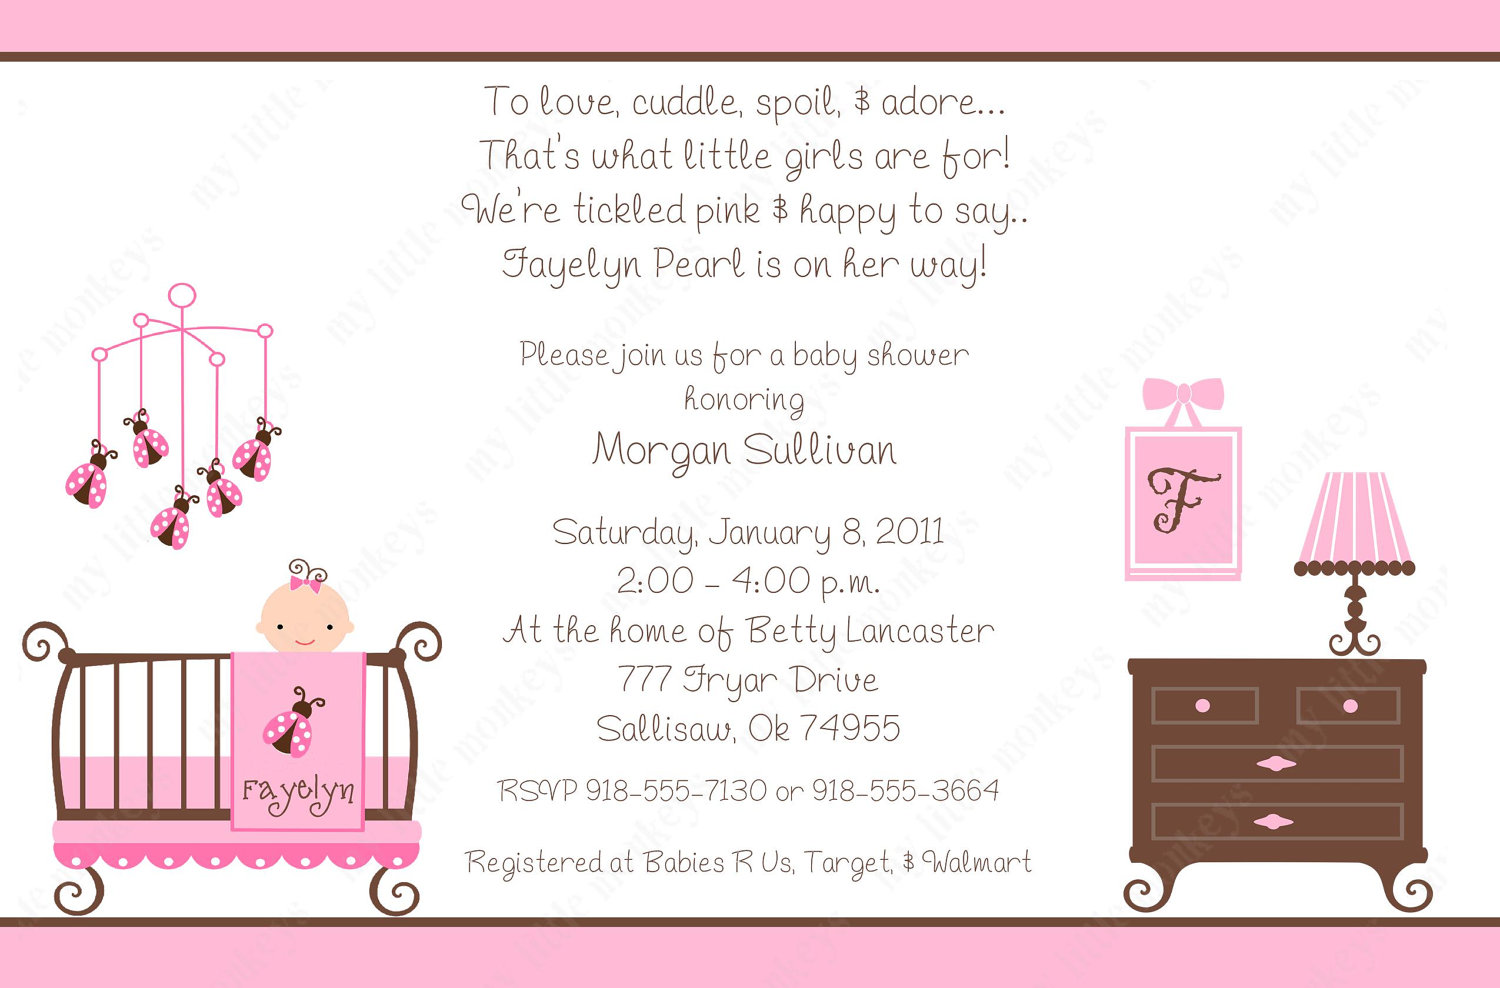 Full Size of Baby Shower:free Printable Baby Shower Games Elegant Baby Shower Baby Shower Centerpiece Ideas For Boys Nursery For Girls Baby Girl Themes For Baby Shower Baby Shower Themes Baby Shower Ideas Baby Shower Decorations Printable Baby Shower Invitations For Girl